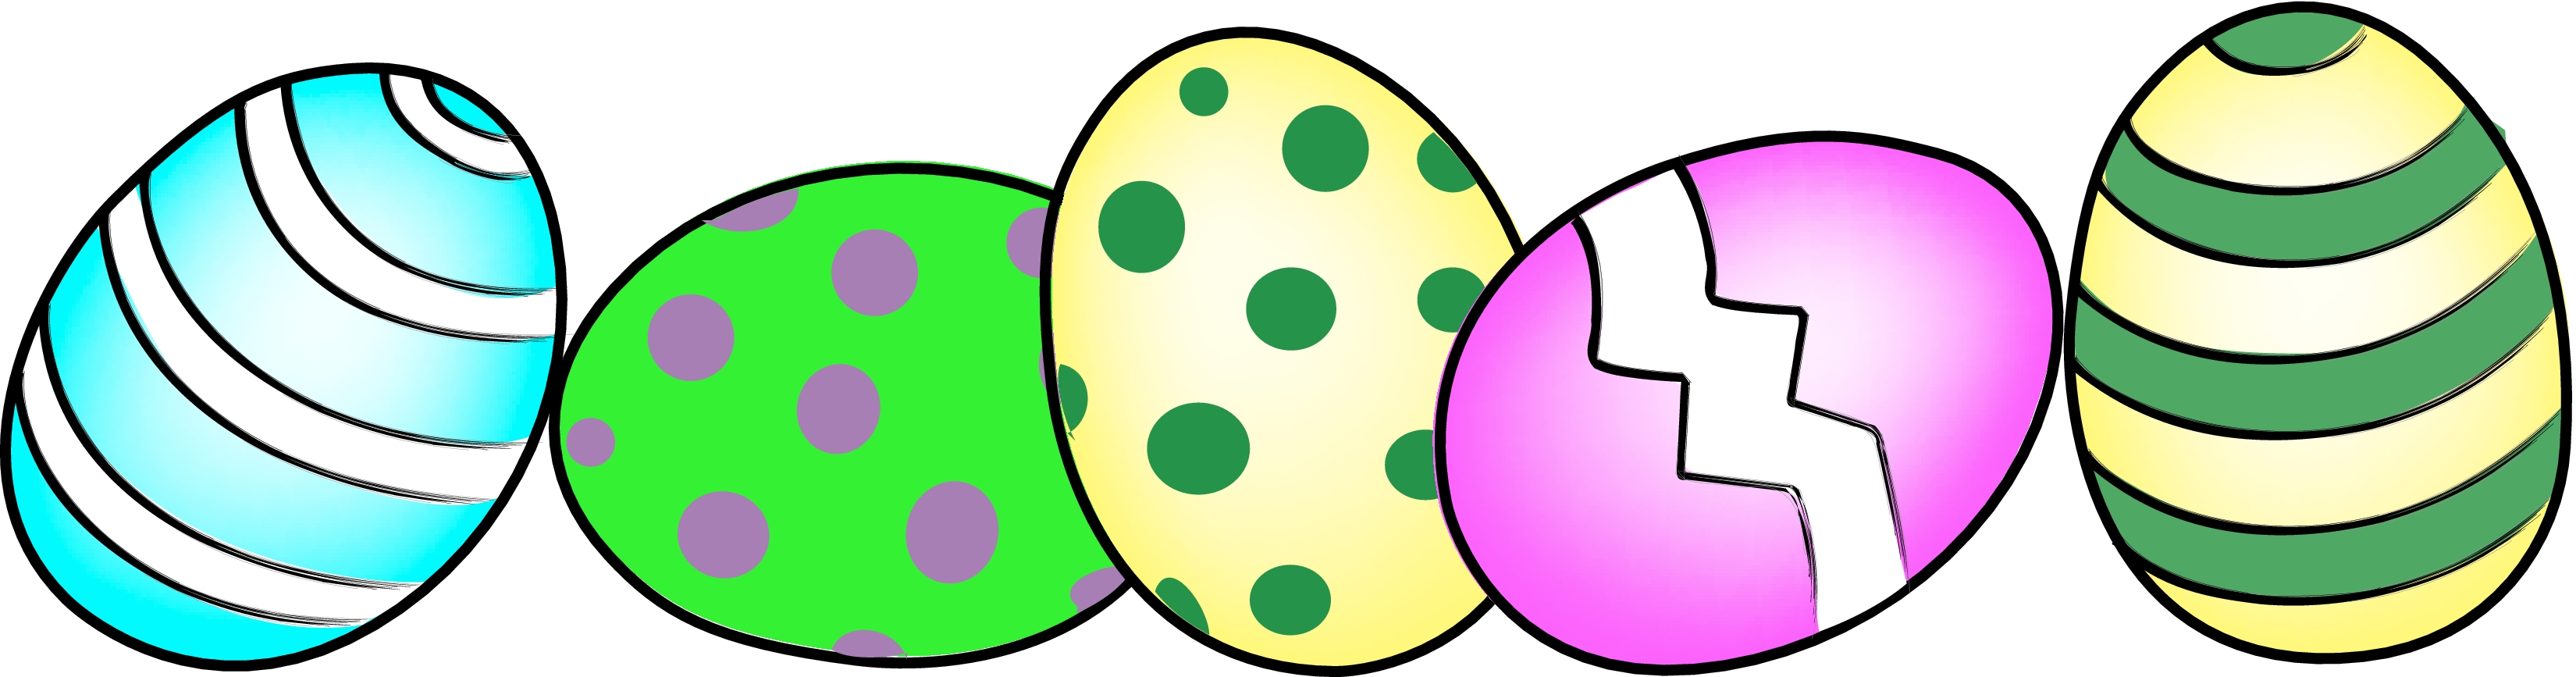 Free Easter Egg Clipart, Download Free Clip Art, Free Clip